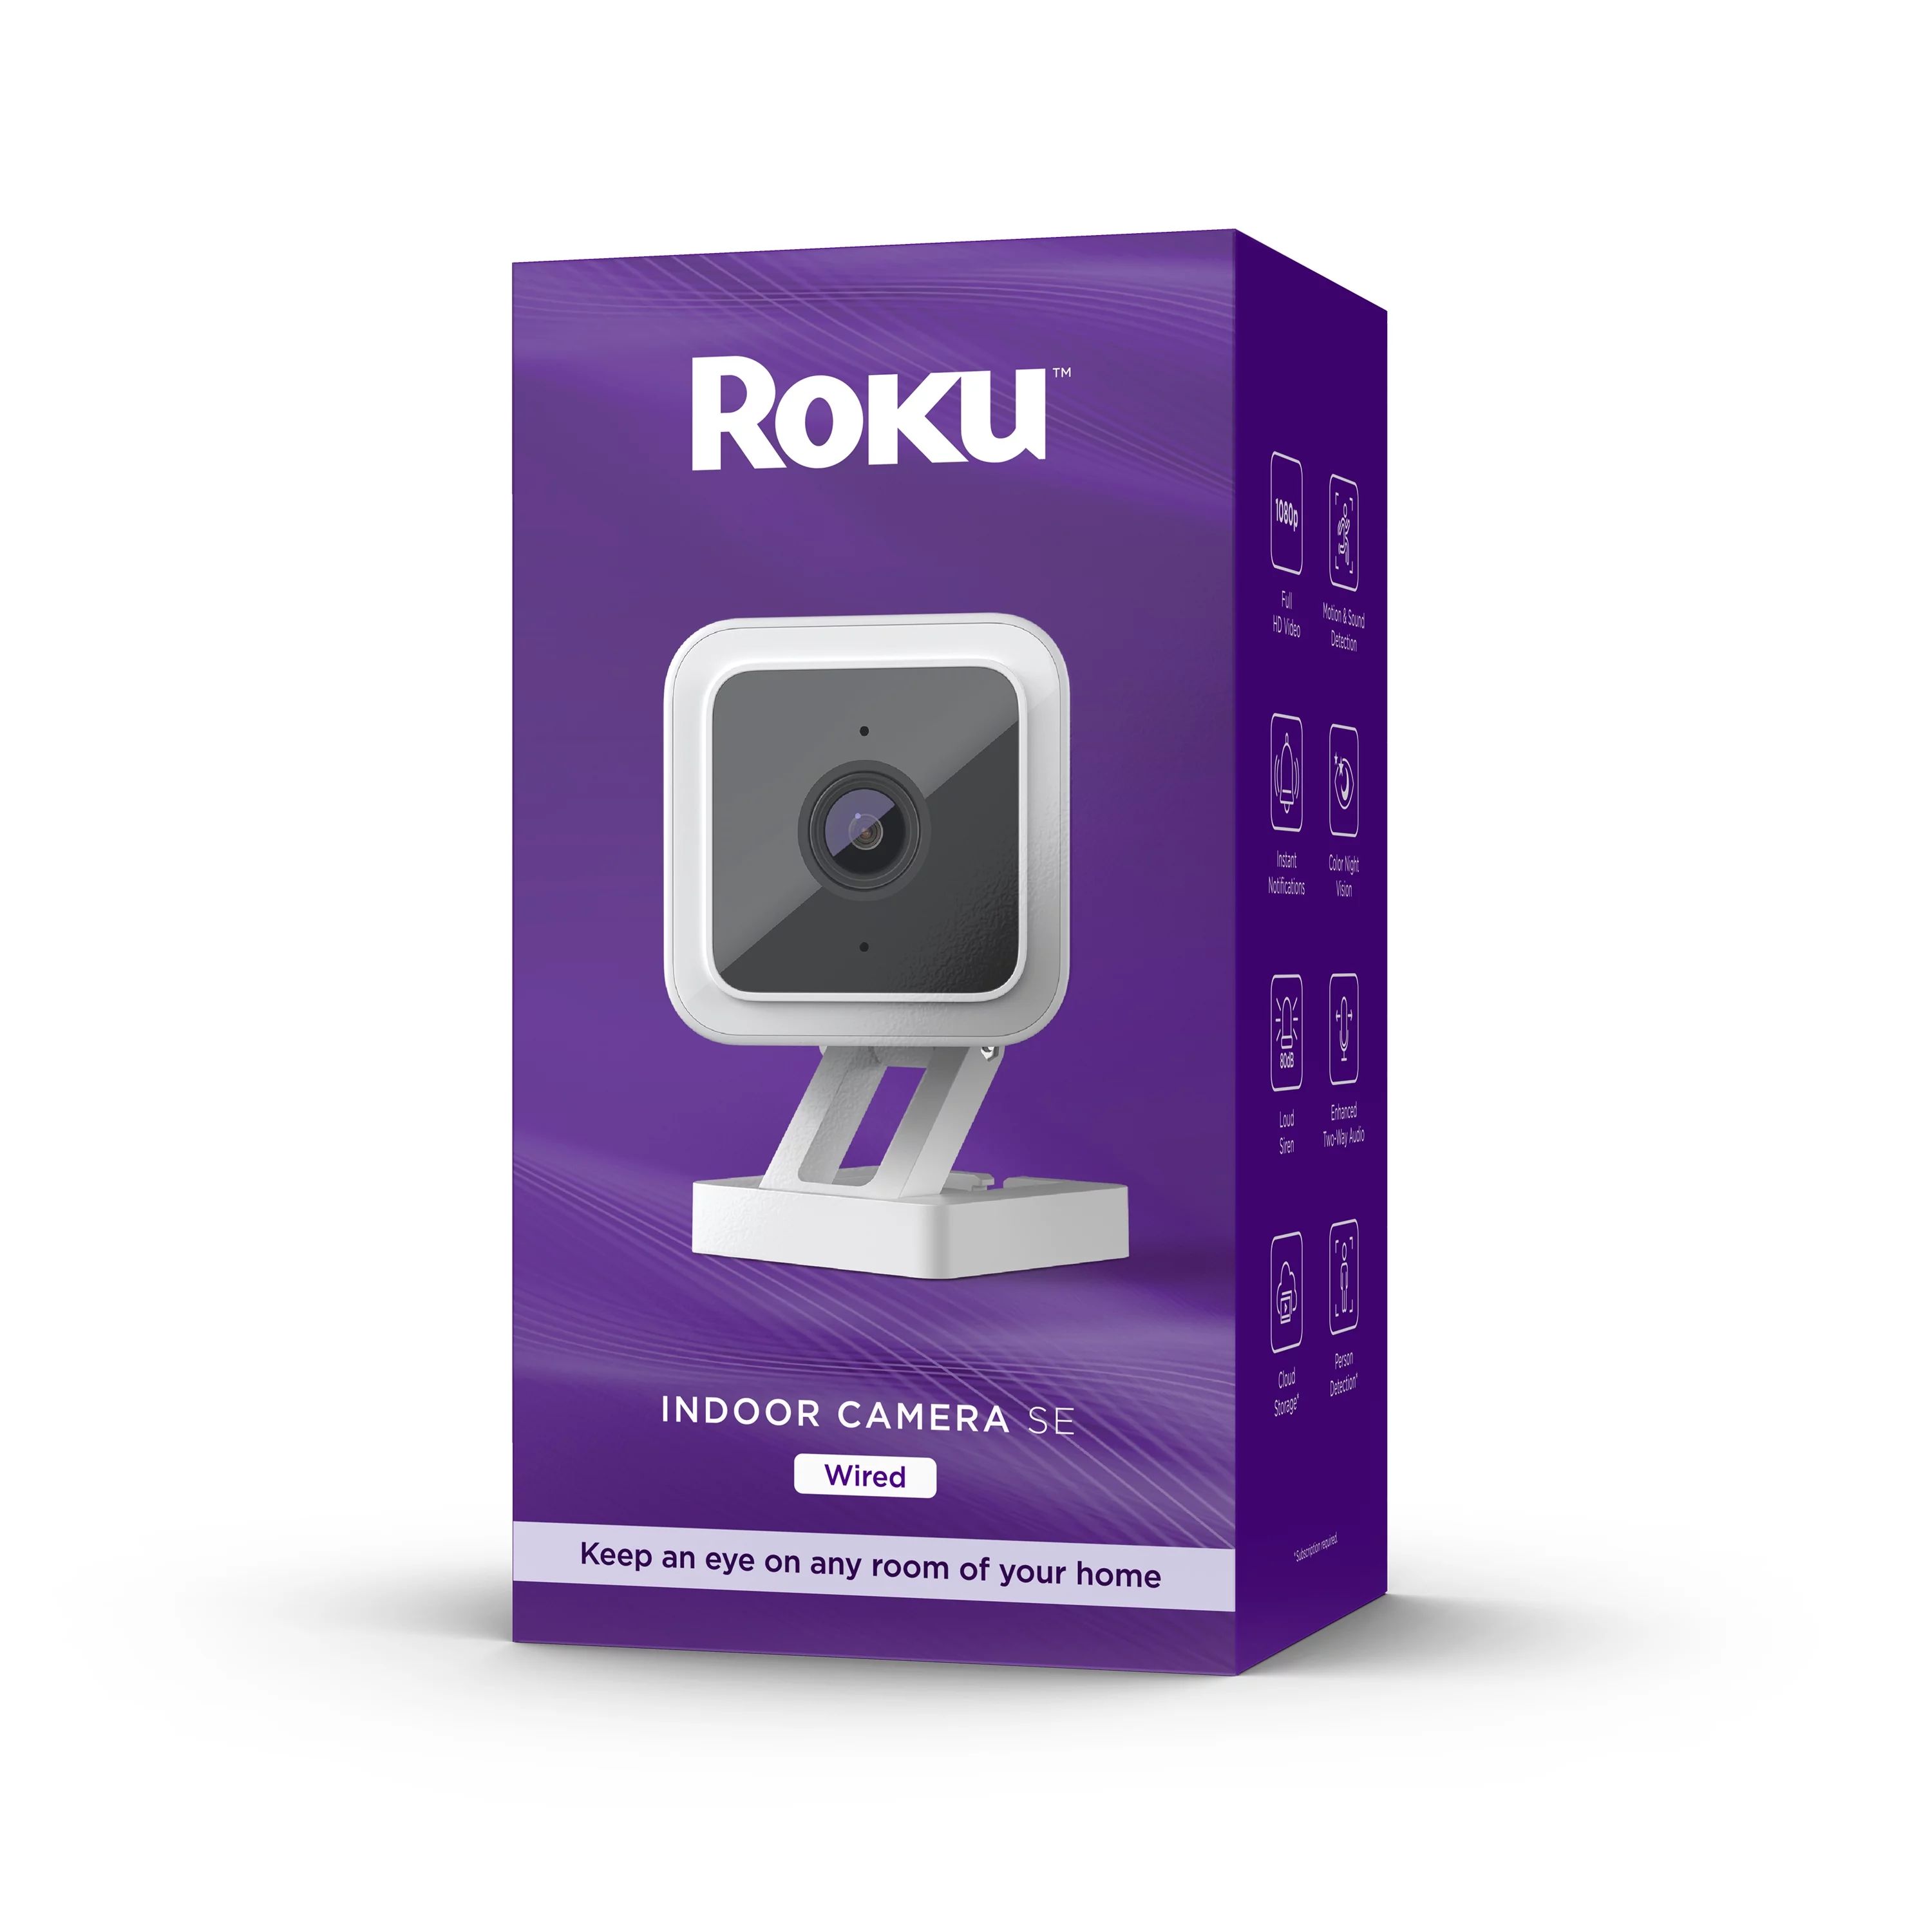 Roku Smart Home Indoor Camera SE Wi-Fi - Wired Security Camera; Motion & Sound Detection | Walmart (US)